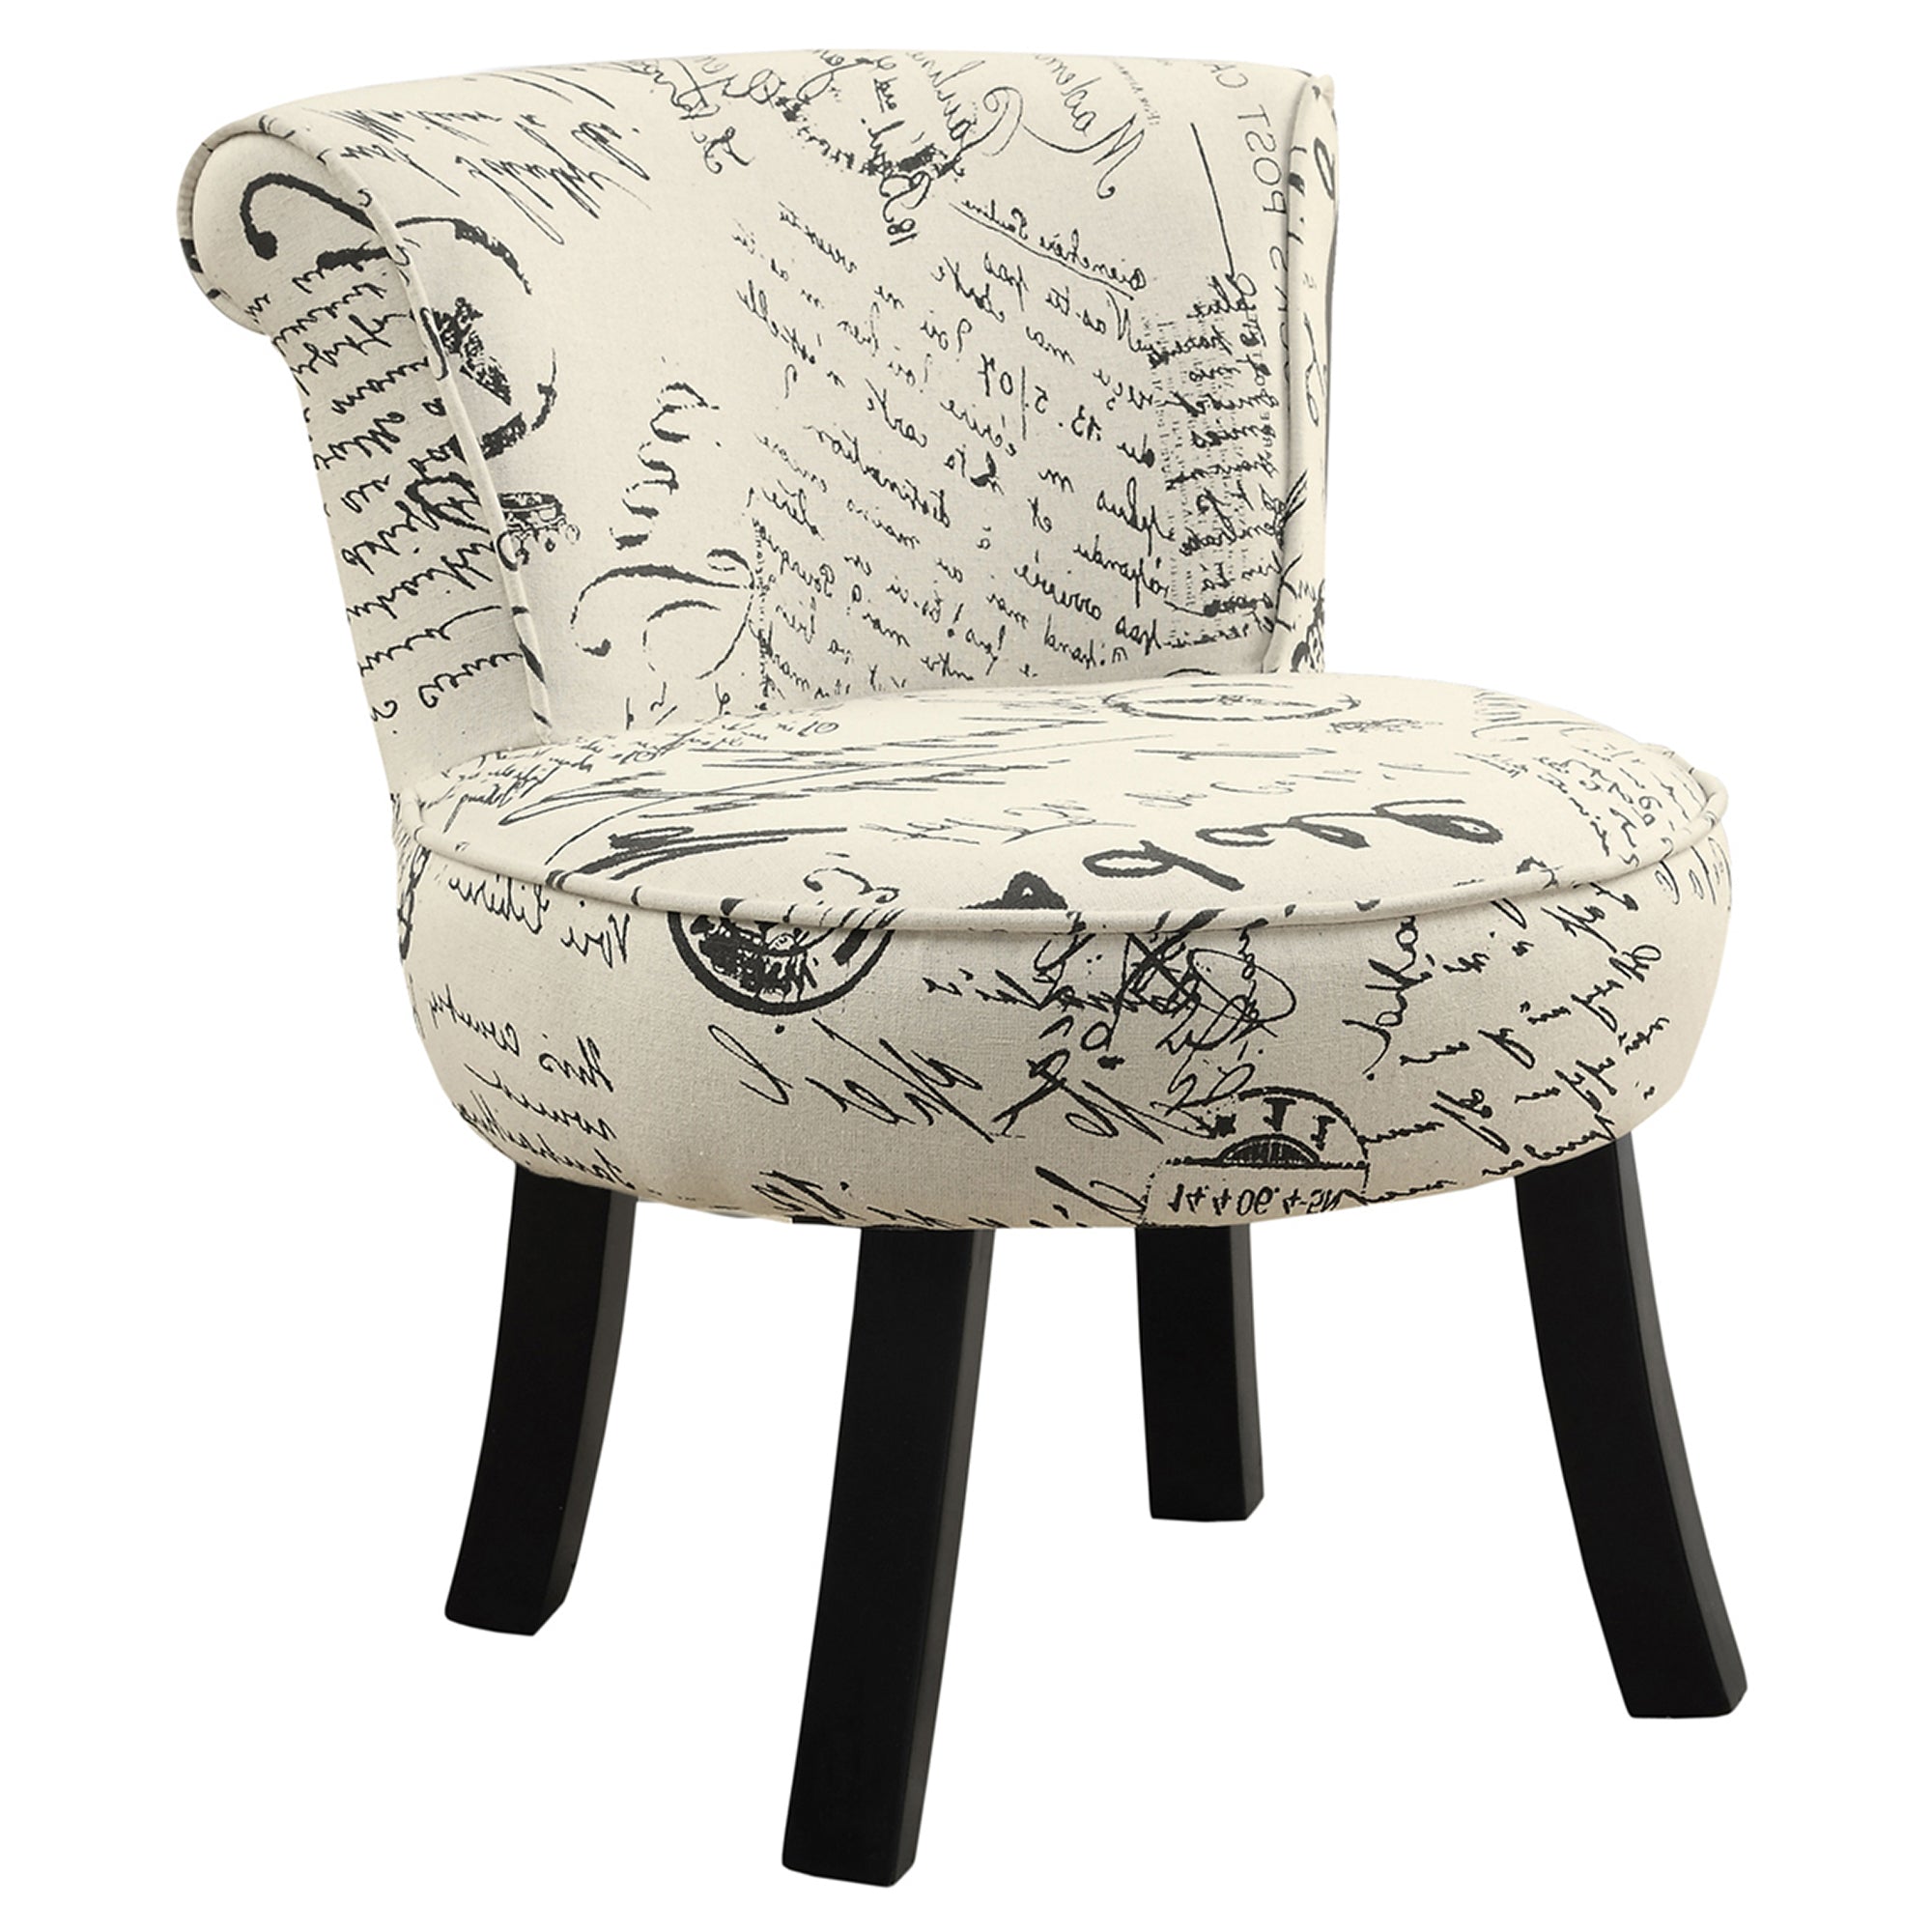 Juvenile Chair - Vintage French Fabric